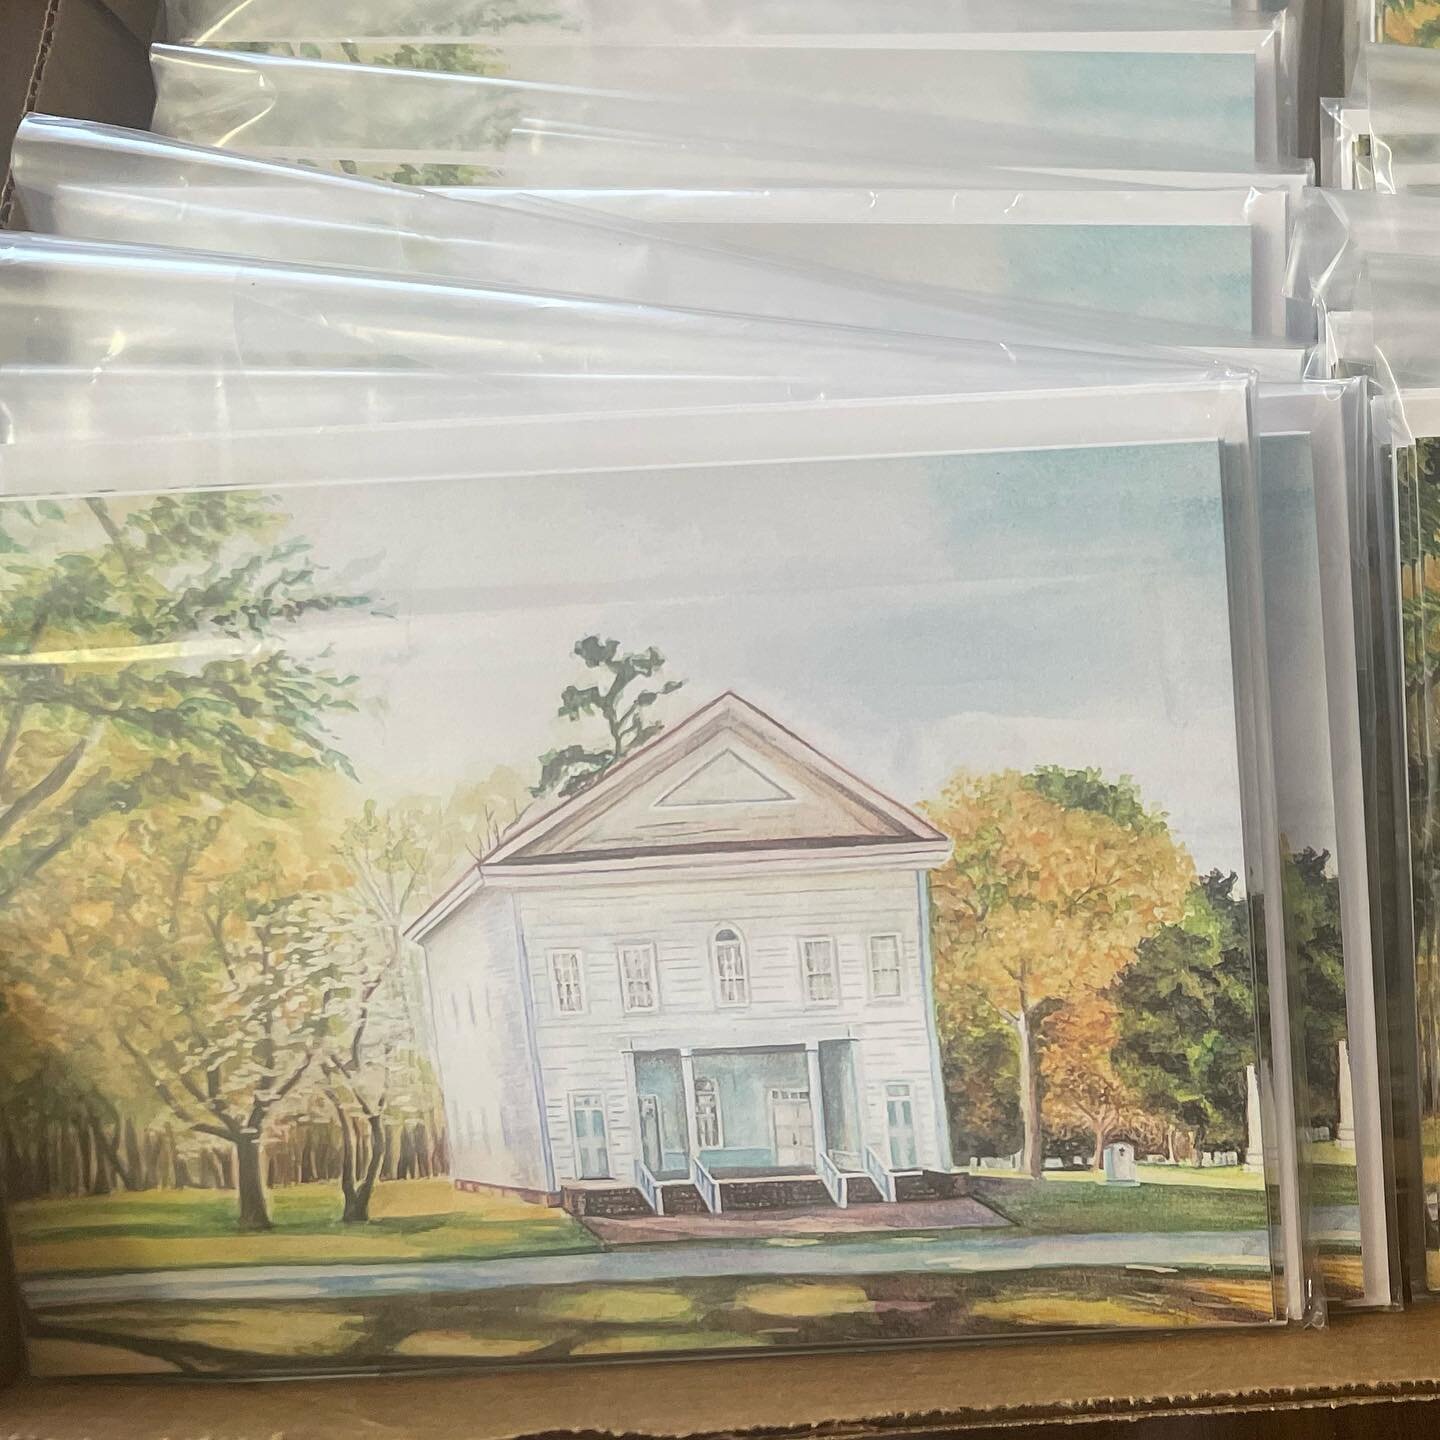 This Sunday at the Old Bluff Reunion, we will be selling these packs of 5x7 cards, 3 for $10, with a beautiful watercolor painting of the church done by Elyse Johnson. The proceeds will go to the Old Bluff Trust Fund.  We have limited amounts of pack